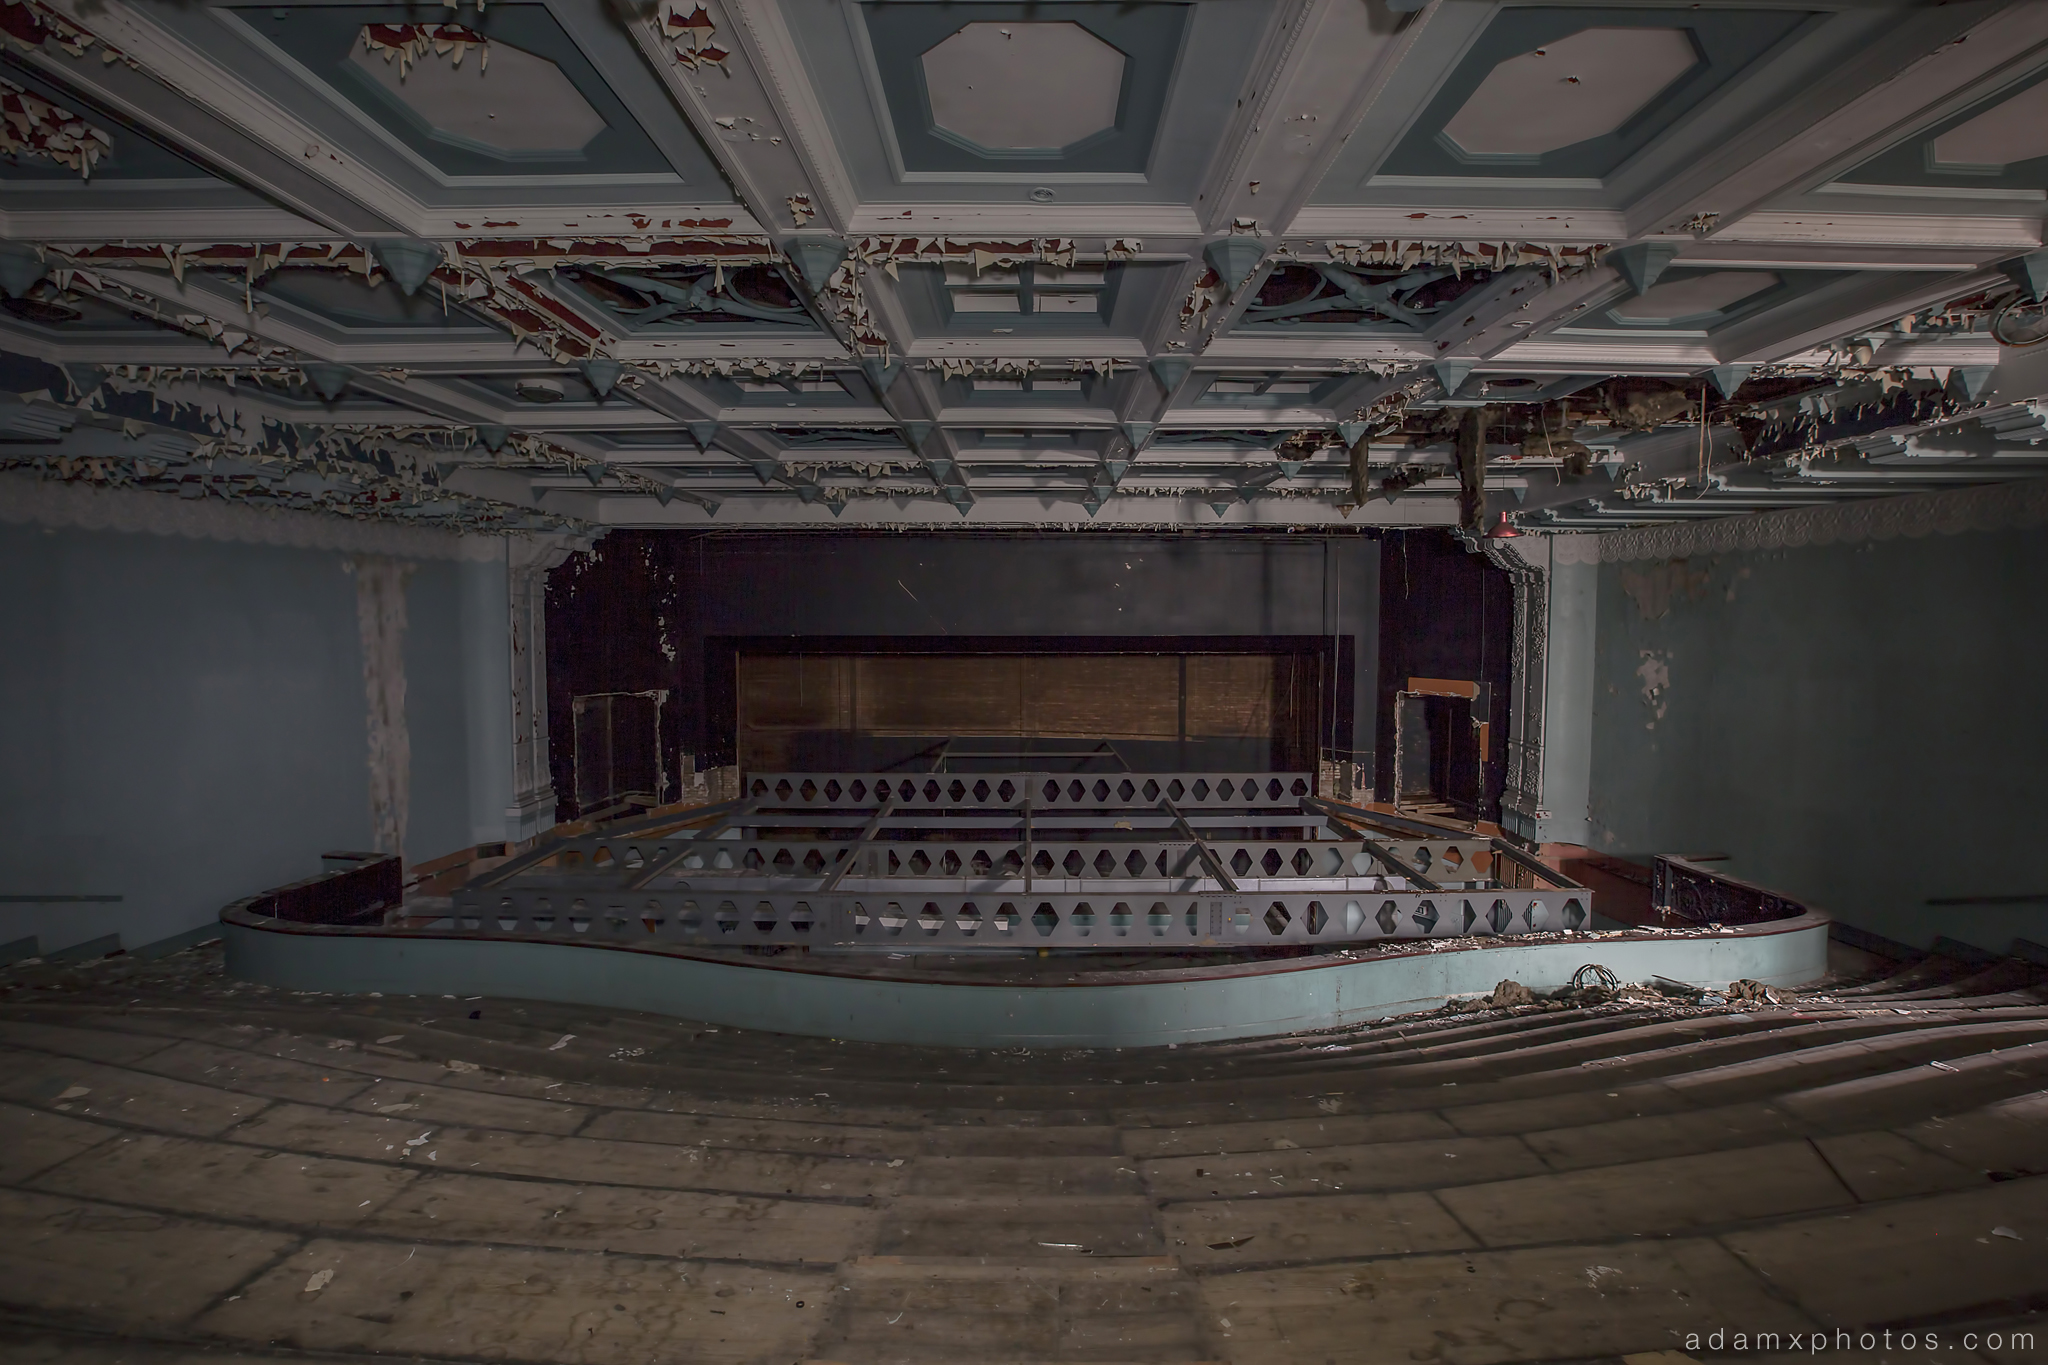 Colchester Odeon Cinema stage auditorium main hall Urbex Adam X Urban Exploration photo photos report decay detail UE abandoned derelict unused empty disused decay decayed decaying grimy grime